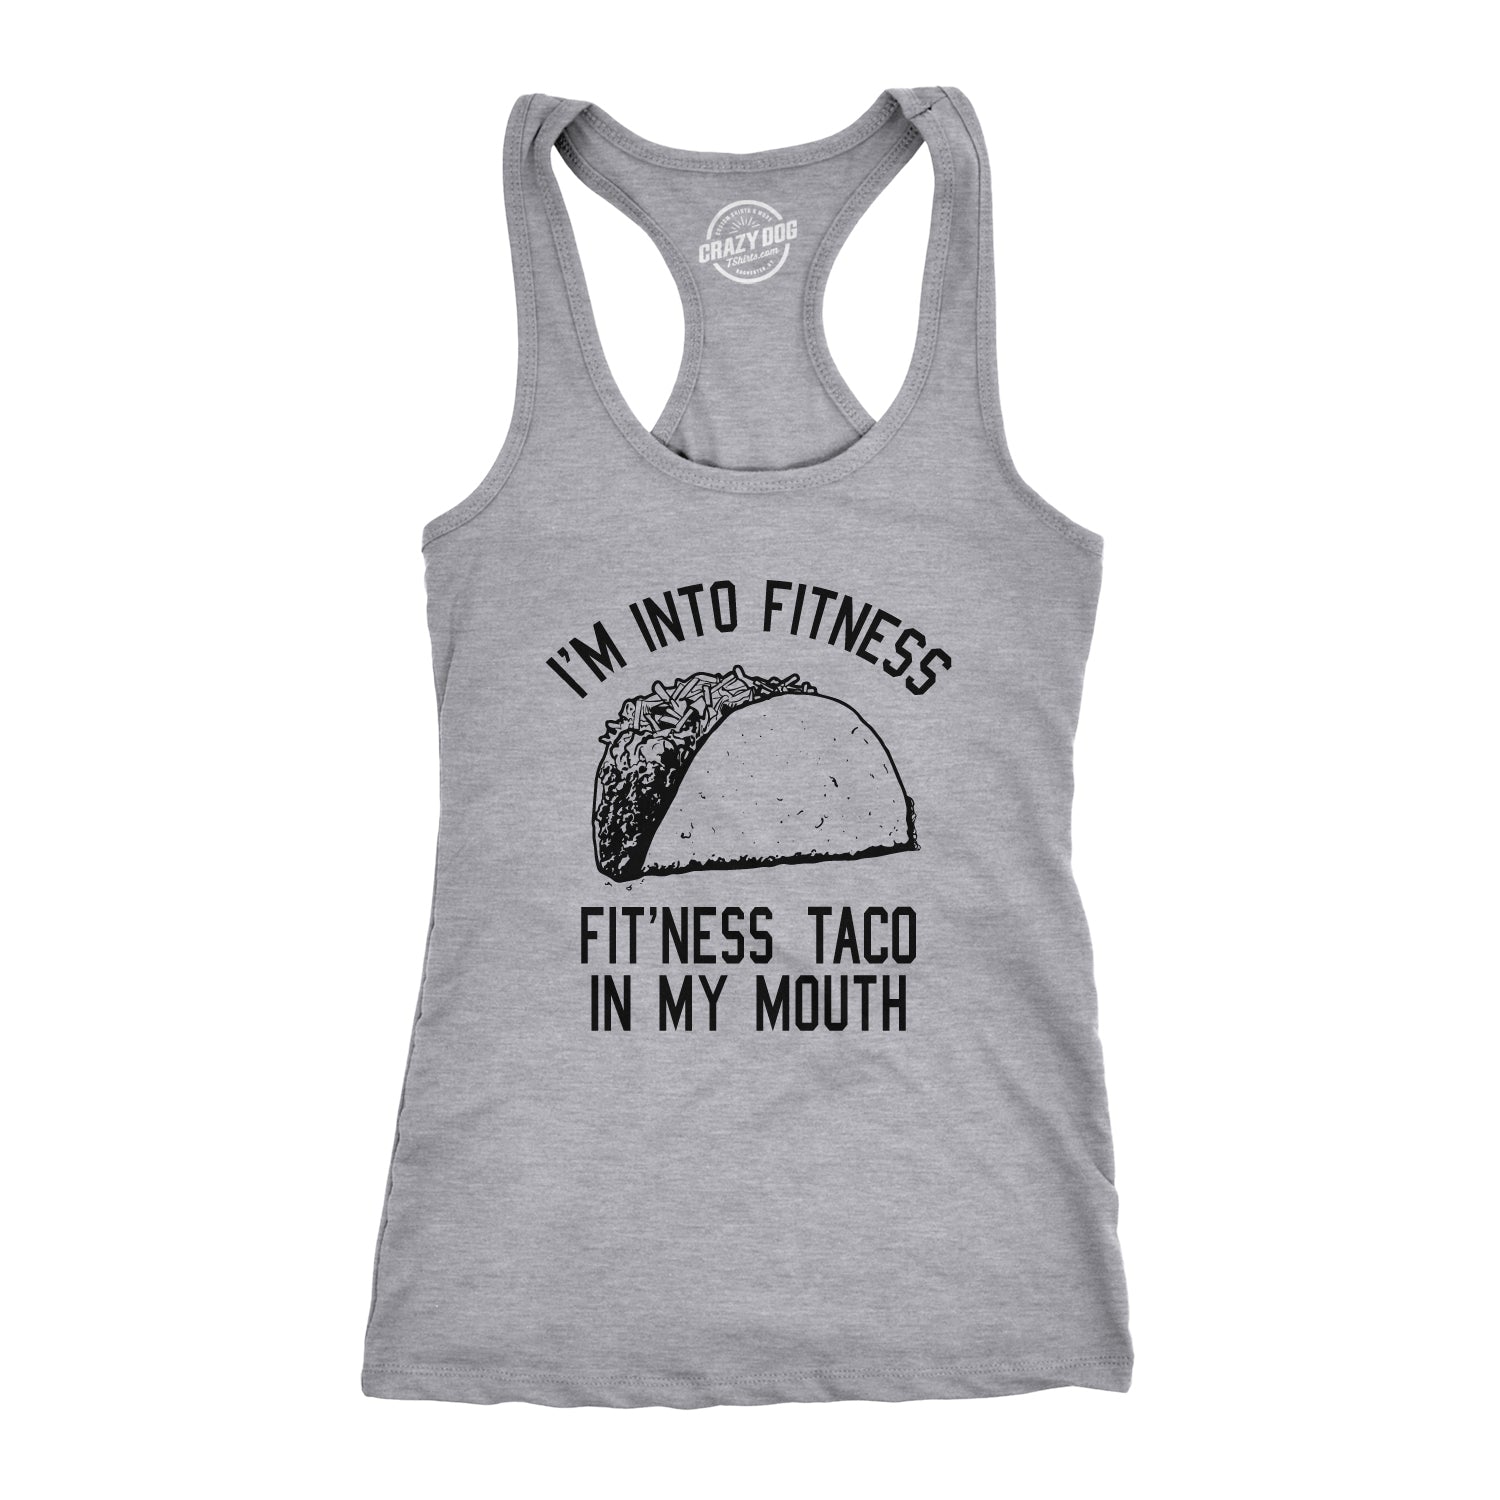 Funny Light Heather Grey I'm Into Fitness Fit'ness Taco In My Mouth Womens Tank Top Nerdy Cinco De Mayo Fitness Tee